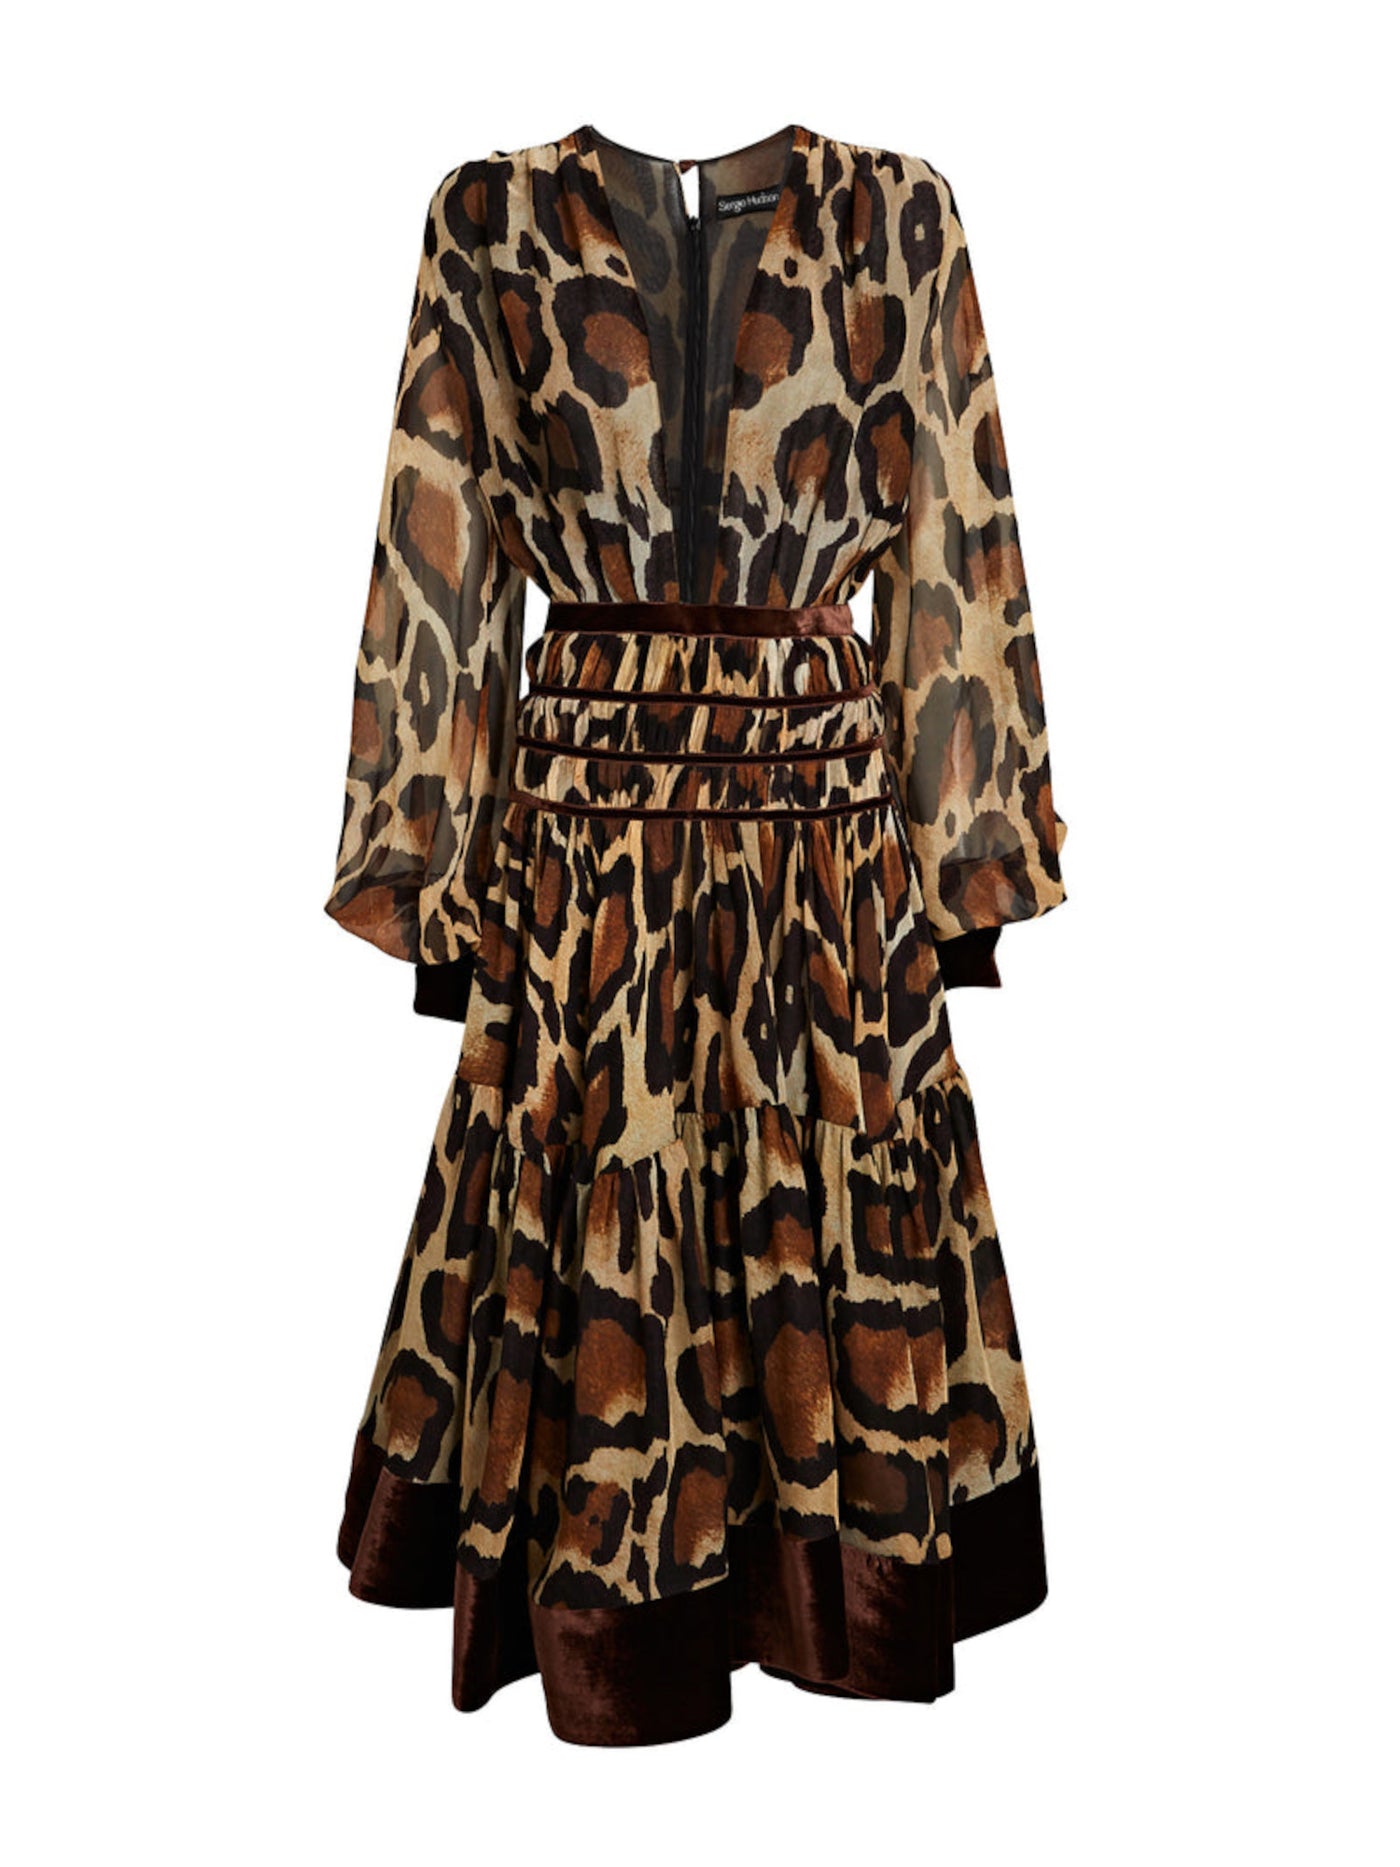 SERGIO HUDSON Womens Brown Zippered Sheer Lined Gathered Animal Print Cuffed Sleeve V Neck Midi Cocktail Fit + Flare Dress 2